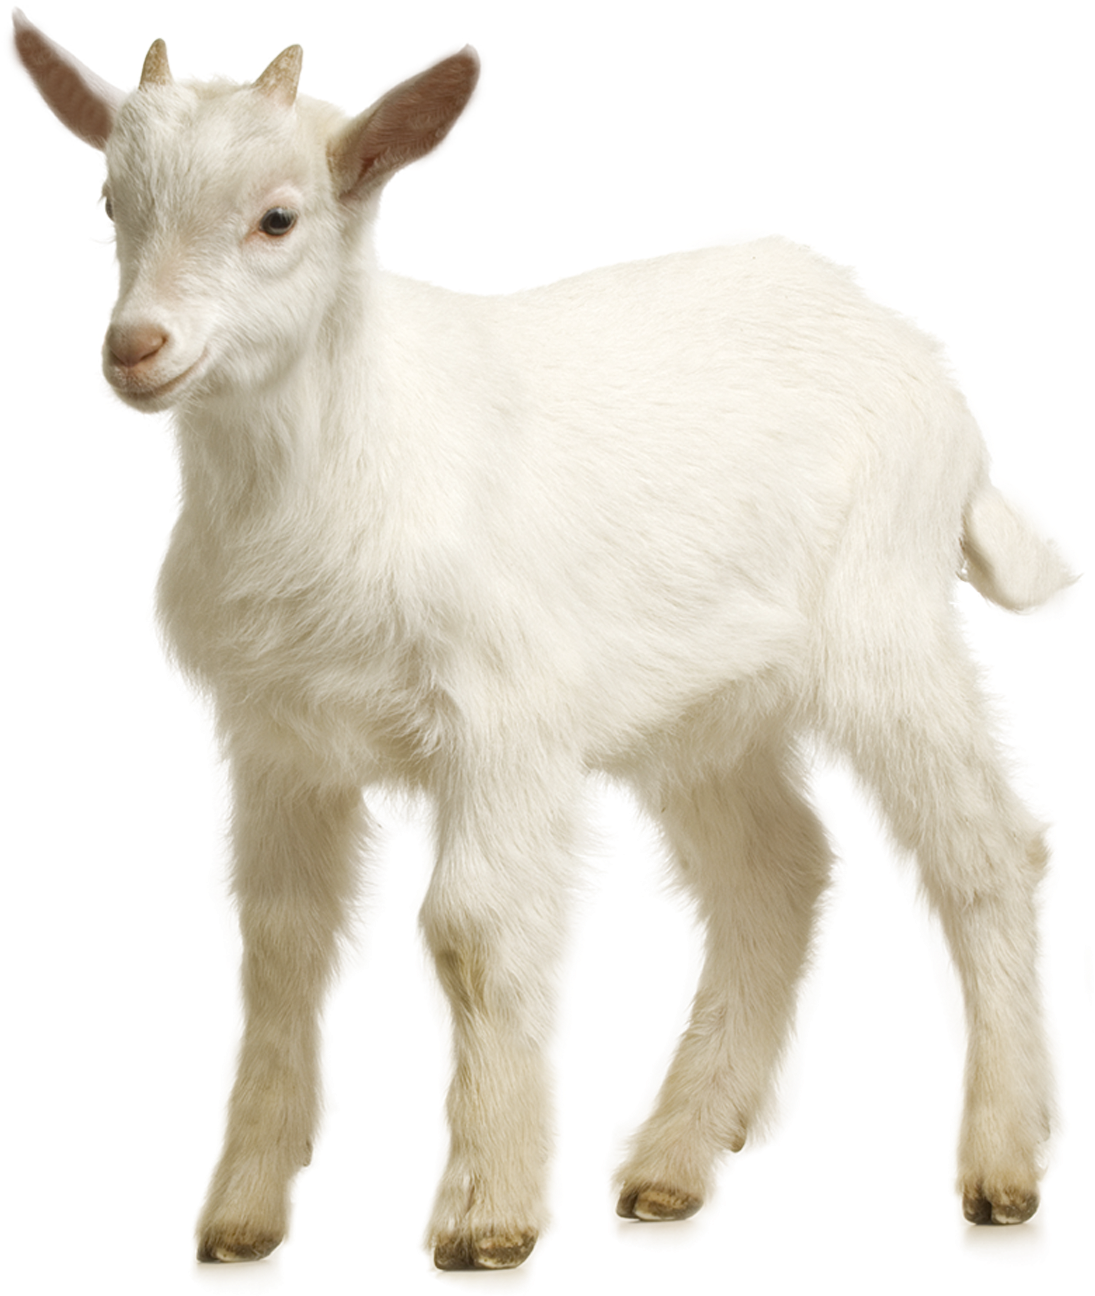 A White Goat With Brown Ears